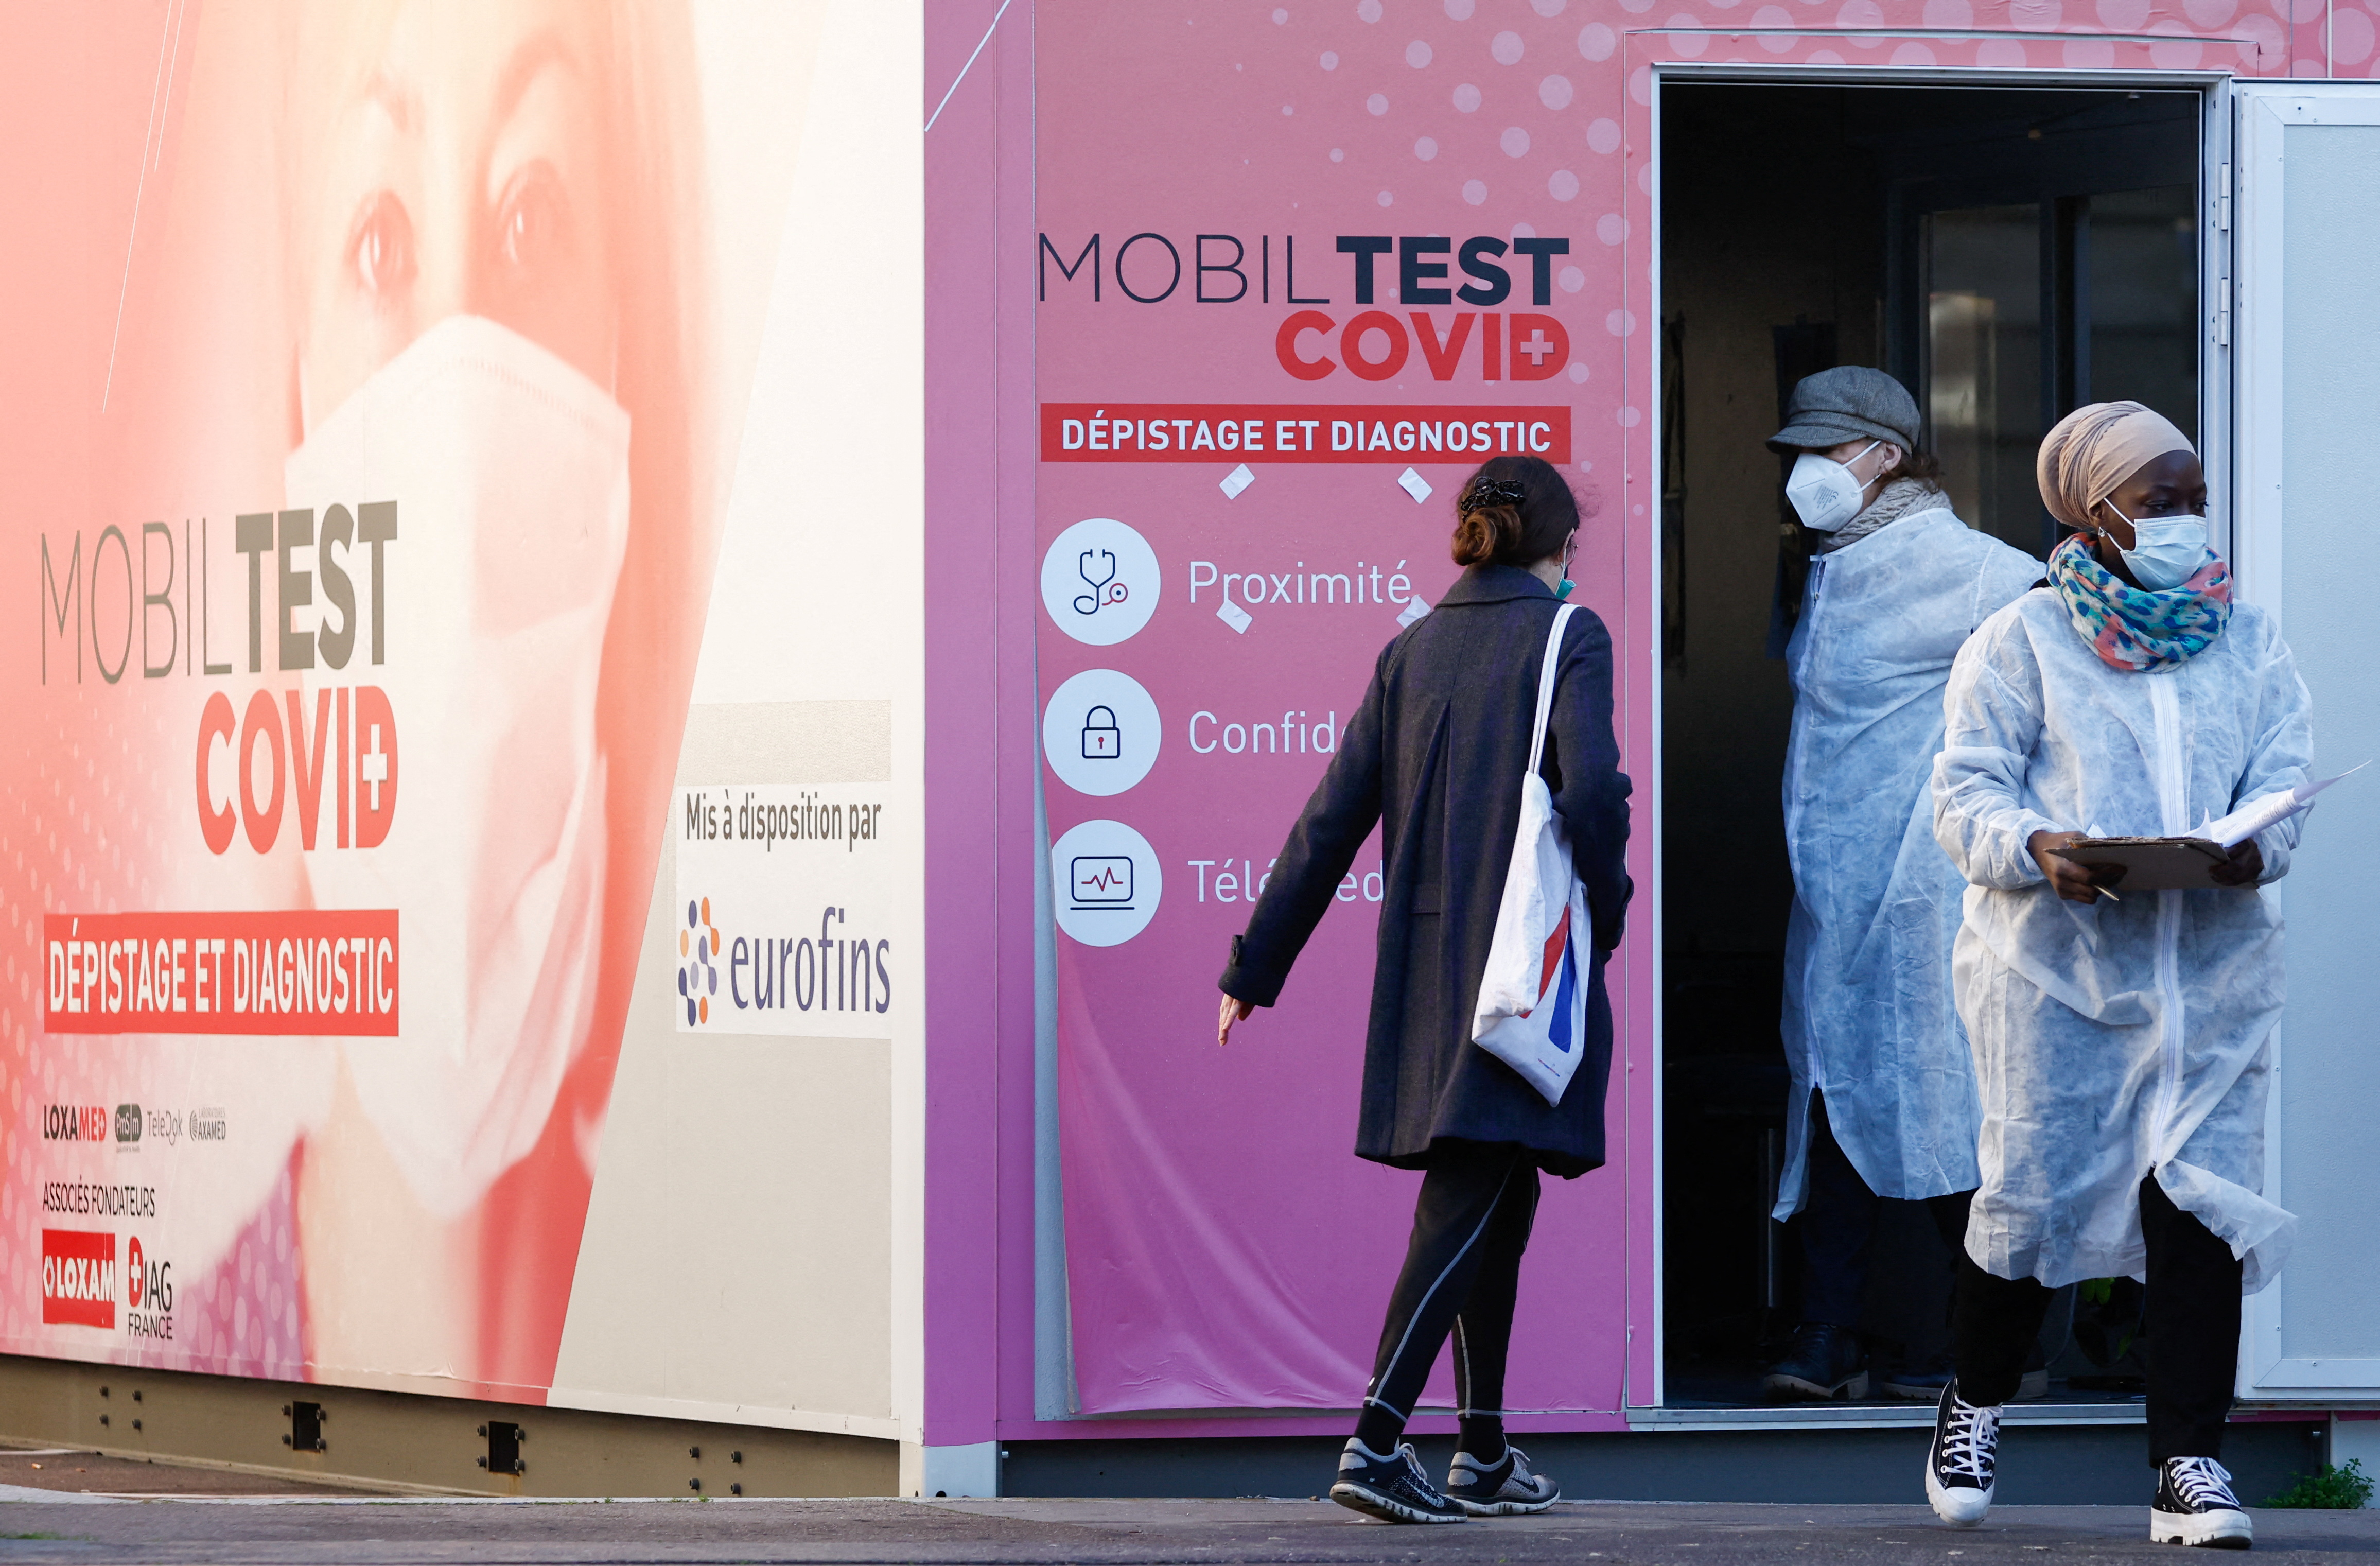 A woman arrives at a mobile test stand for coronavirus disease (COVID-19) in Paris, France, December 31, 2021. REUTERS / Christian Hartmann